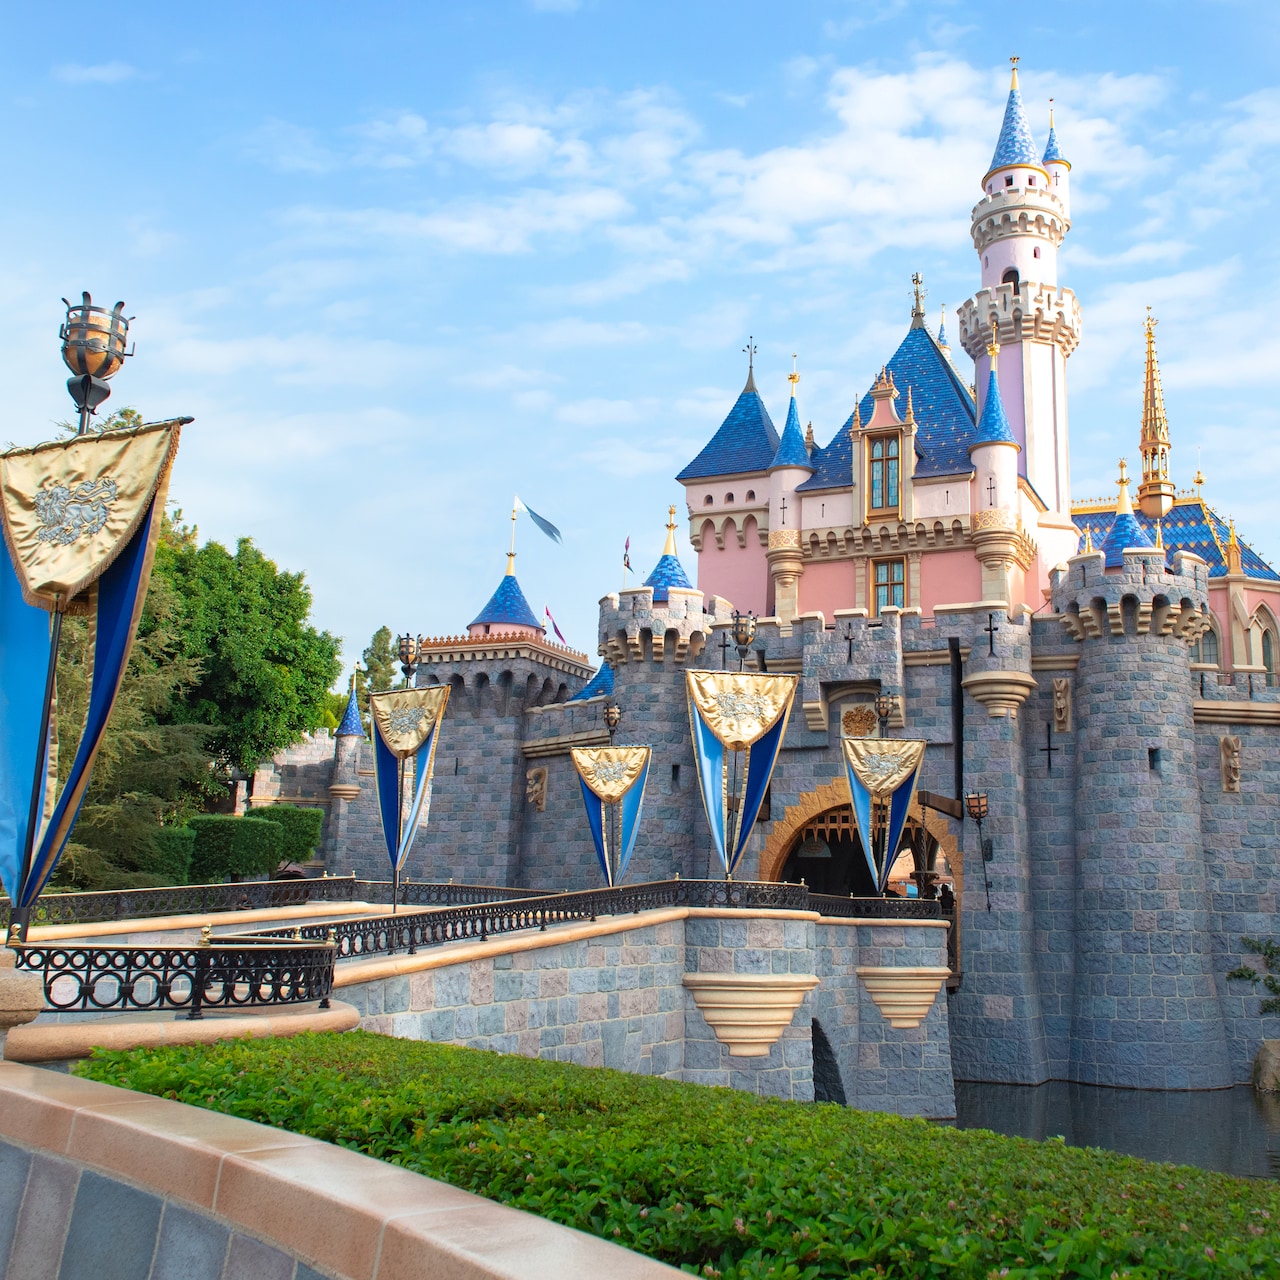 Surrounded by water, Sleeping Beauty Castle features a flag lined bridge leading up to its entrance